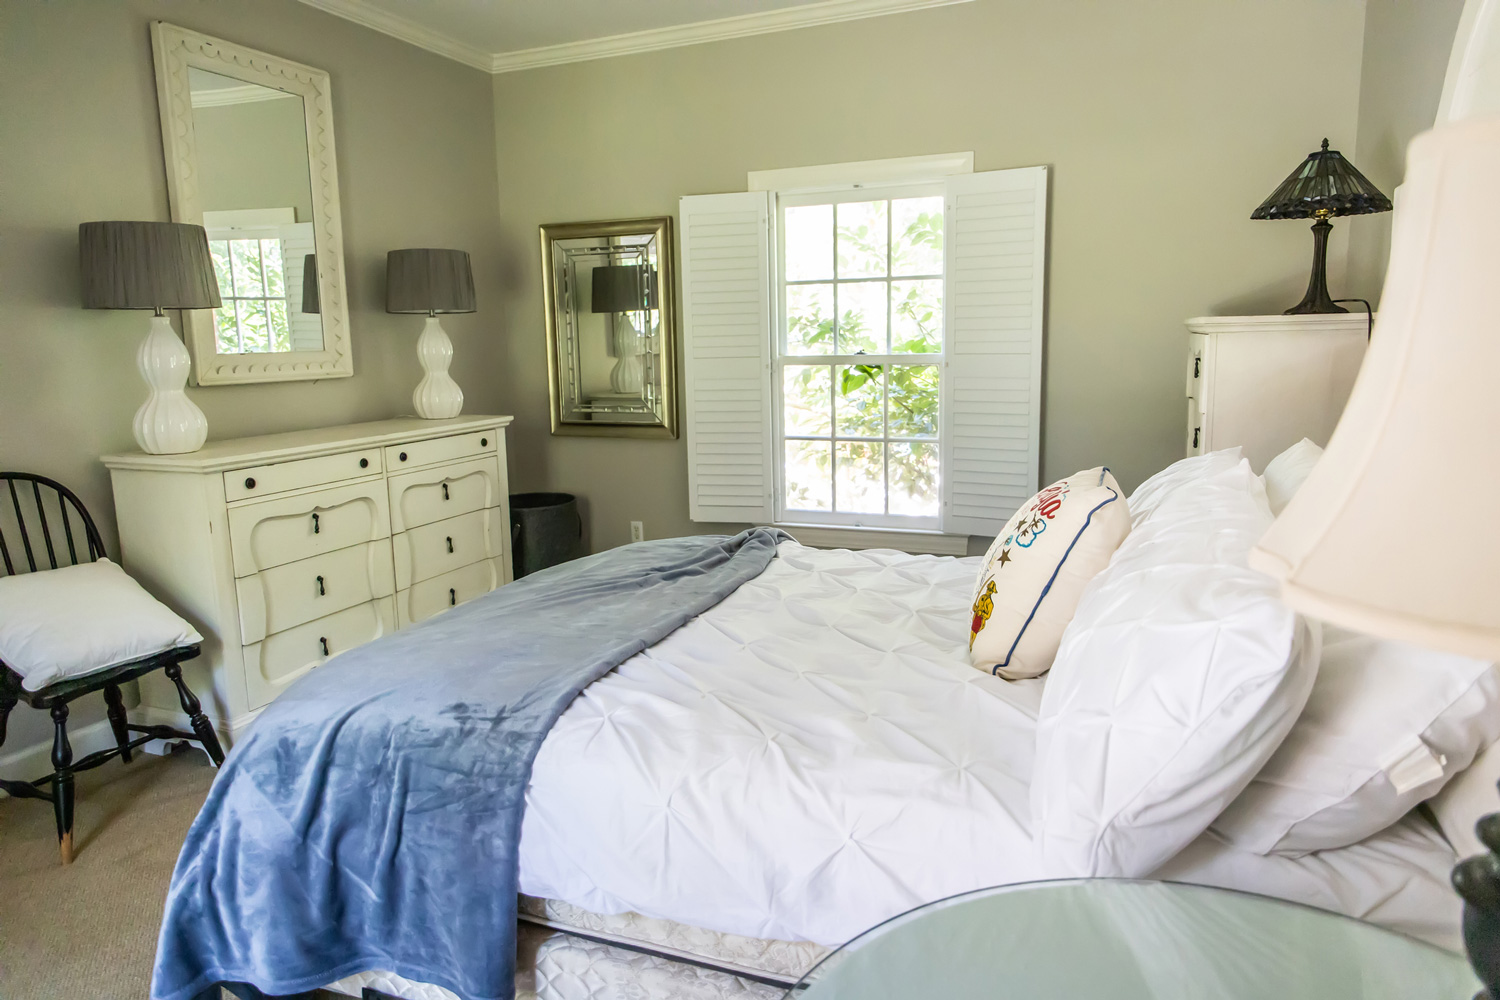 Guest bedroom with white bedding and a blue blanket